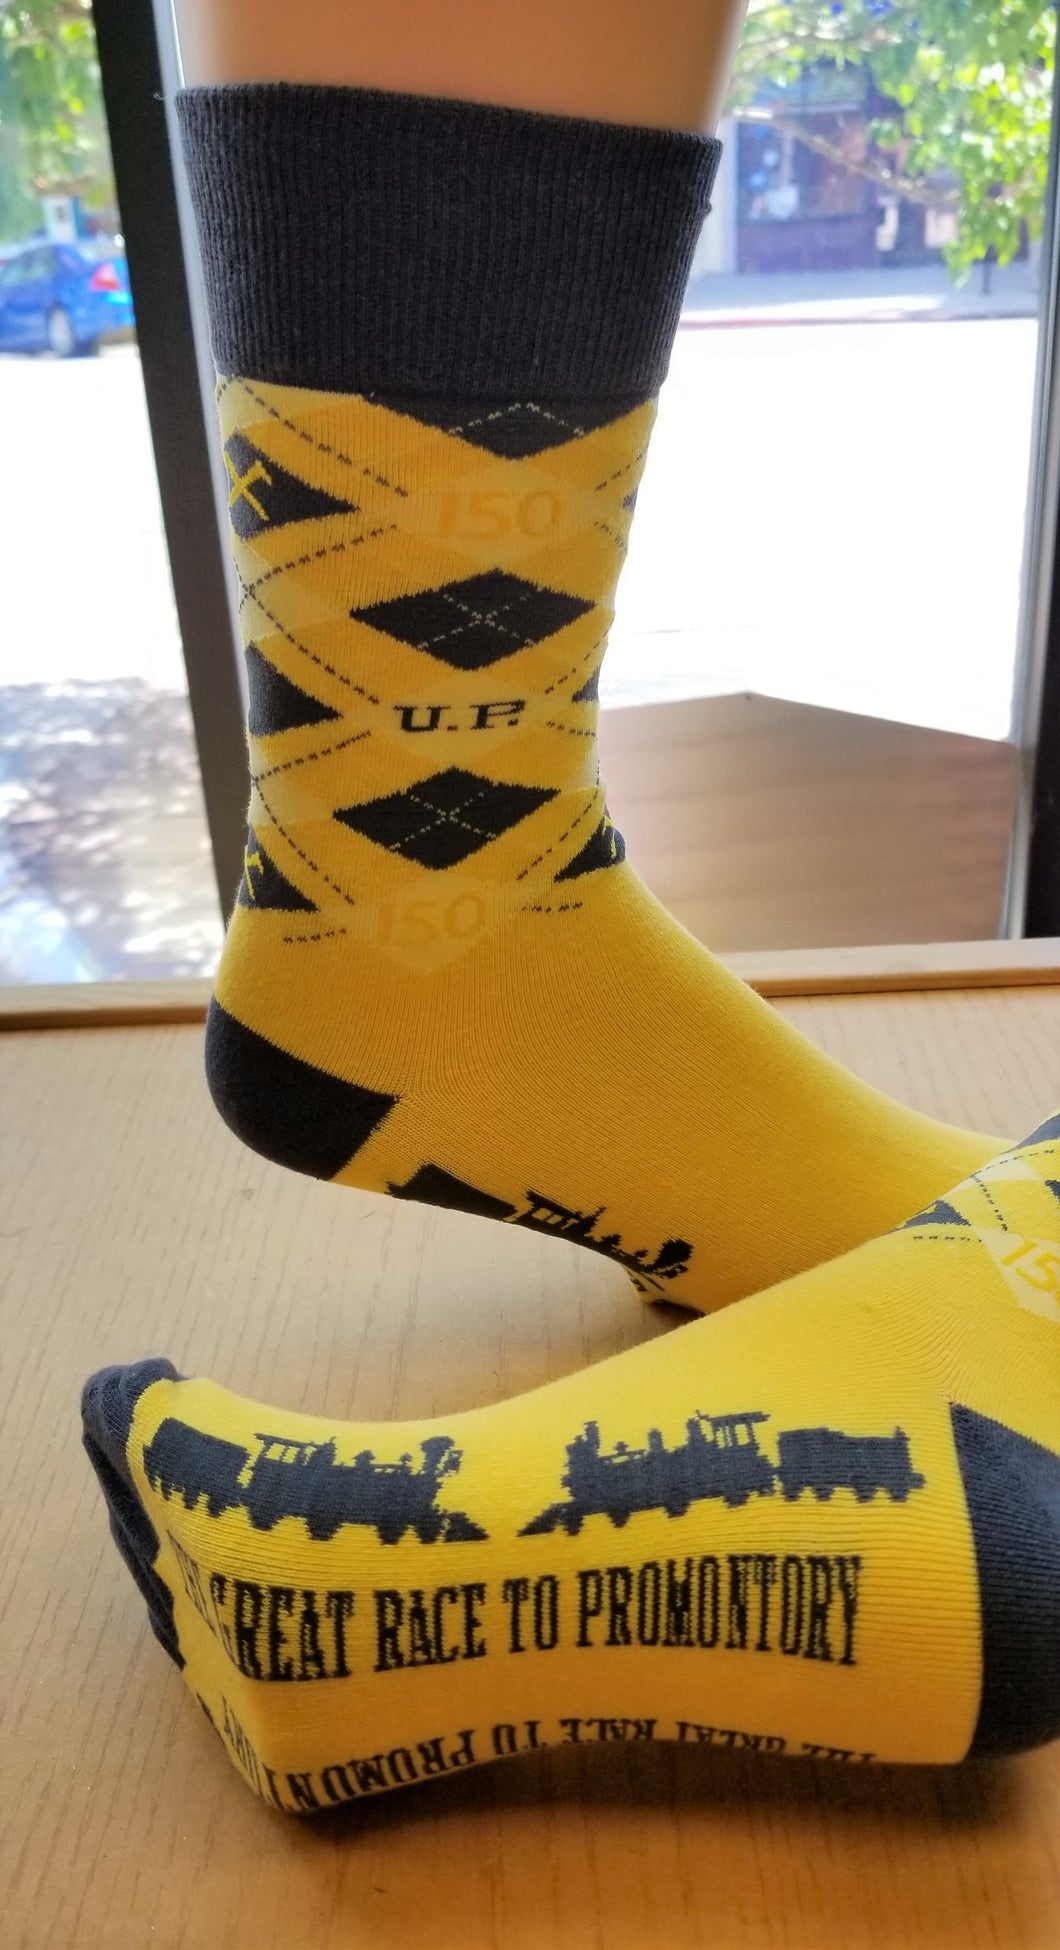 150th Great Race to Promontory Anniversary Socks